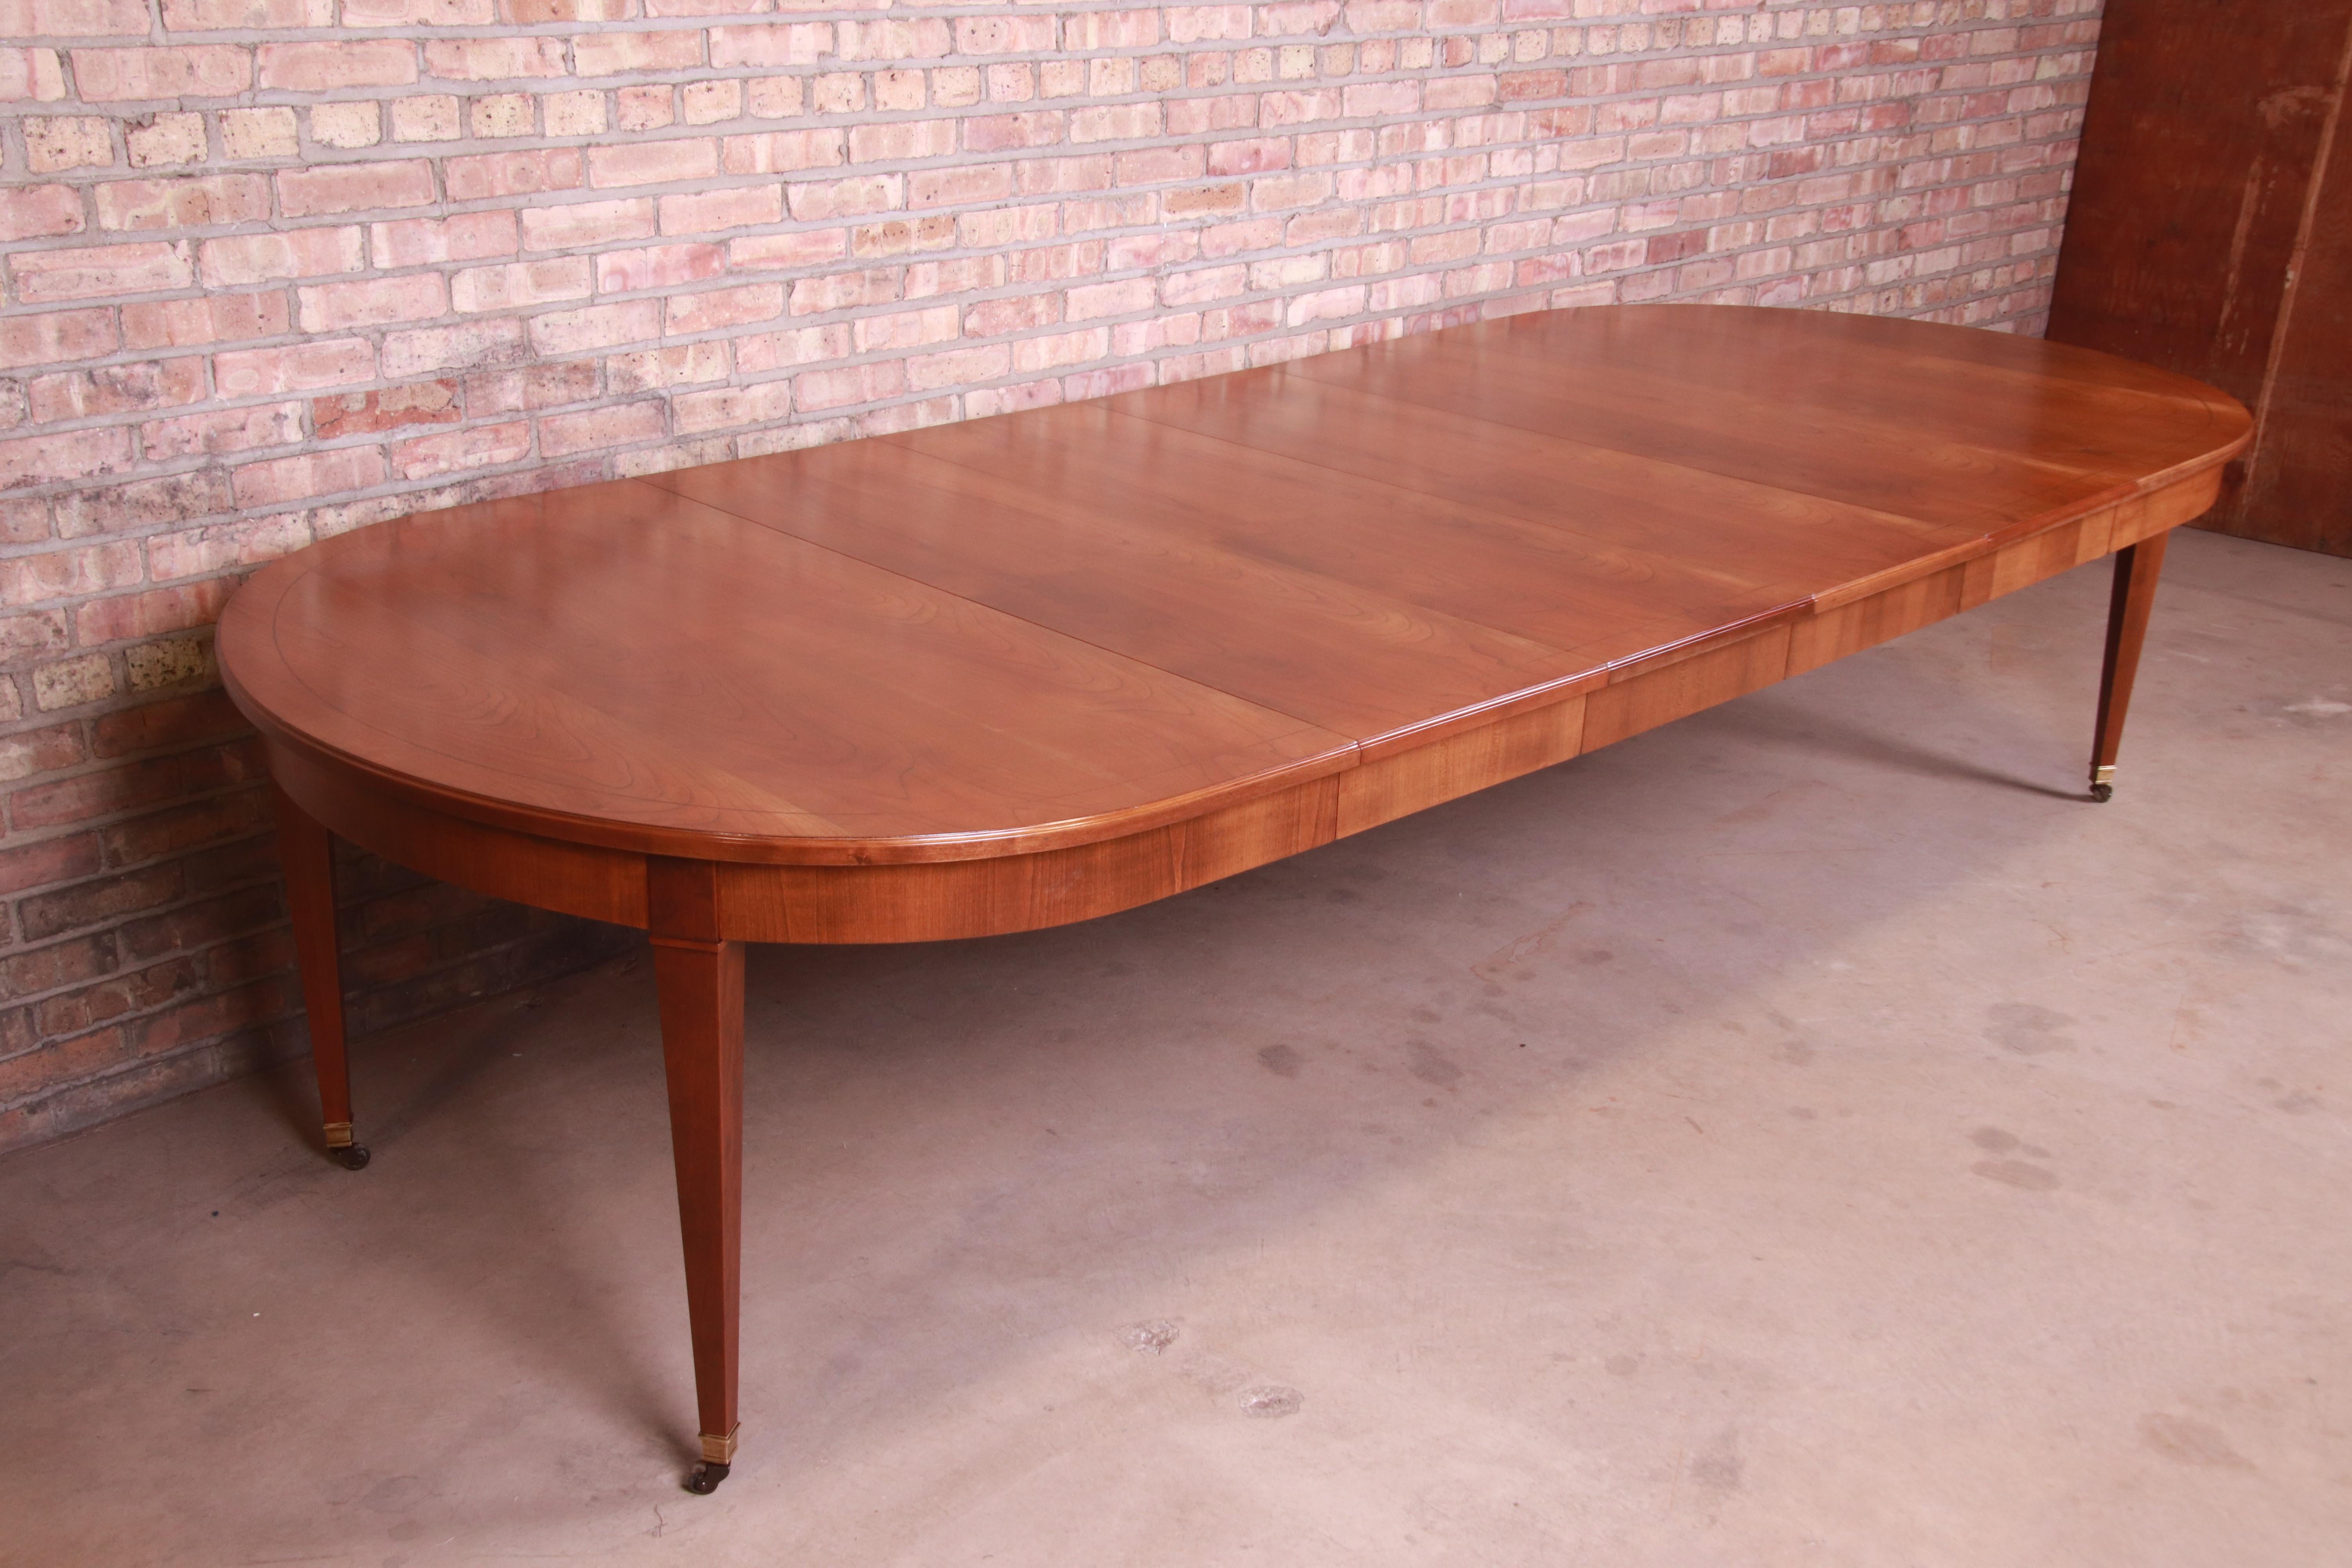 20th Century Baker Furniture French Regency Cherrywood Extension Dining Table, Refinished